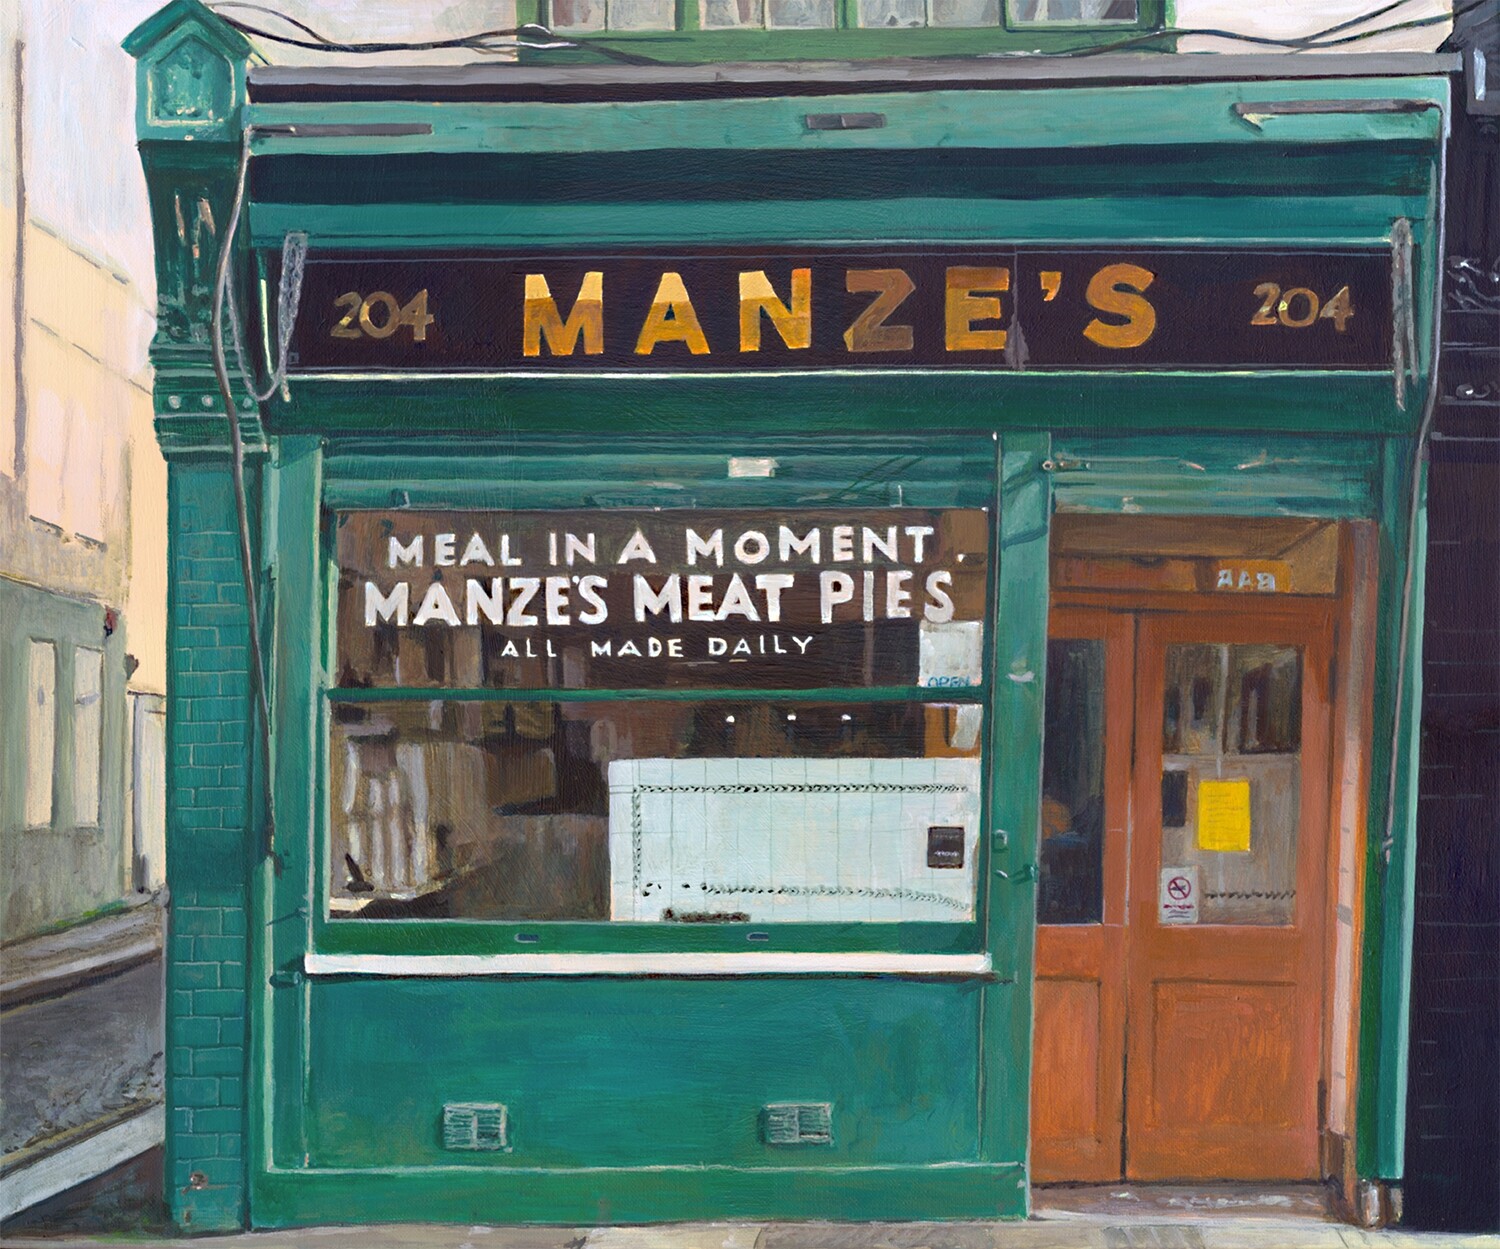 Manze's Meat Pies